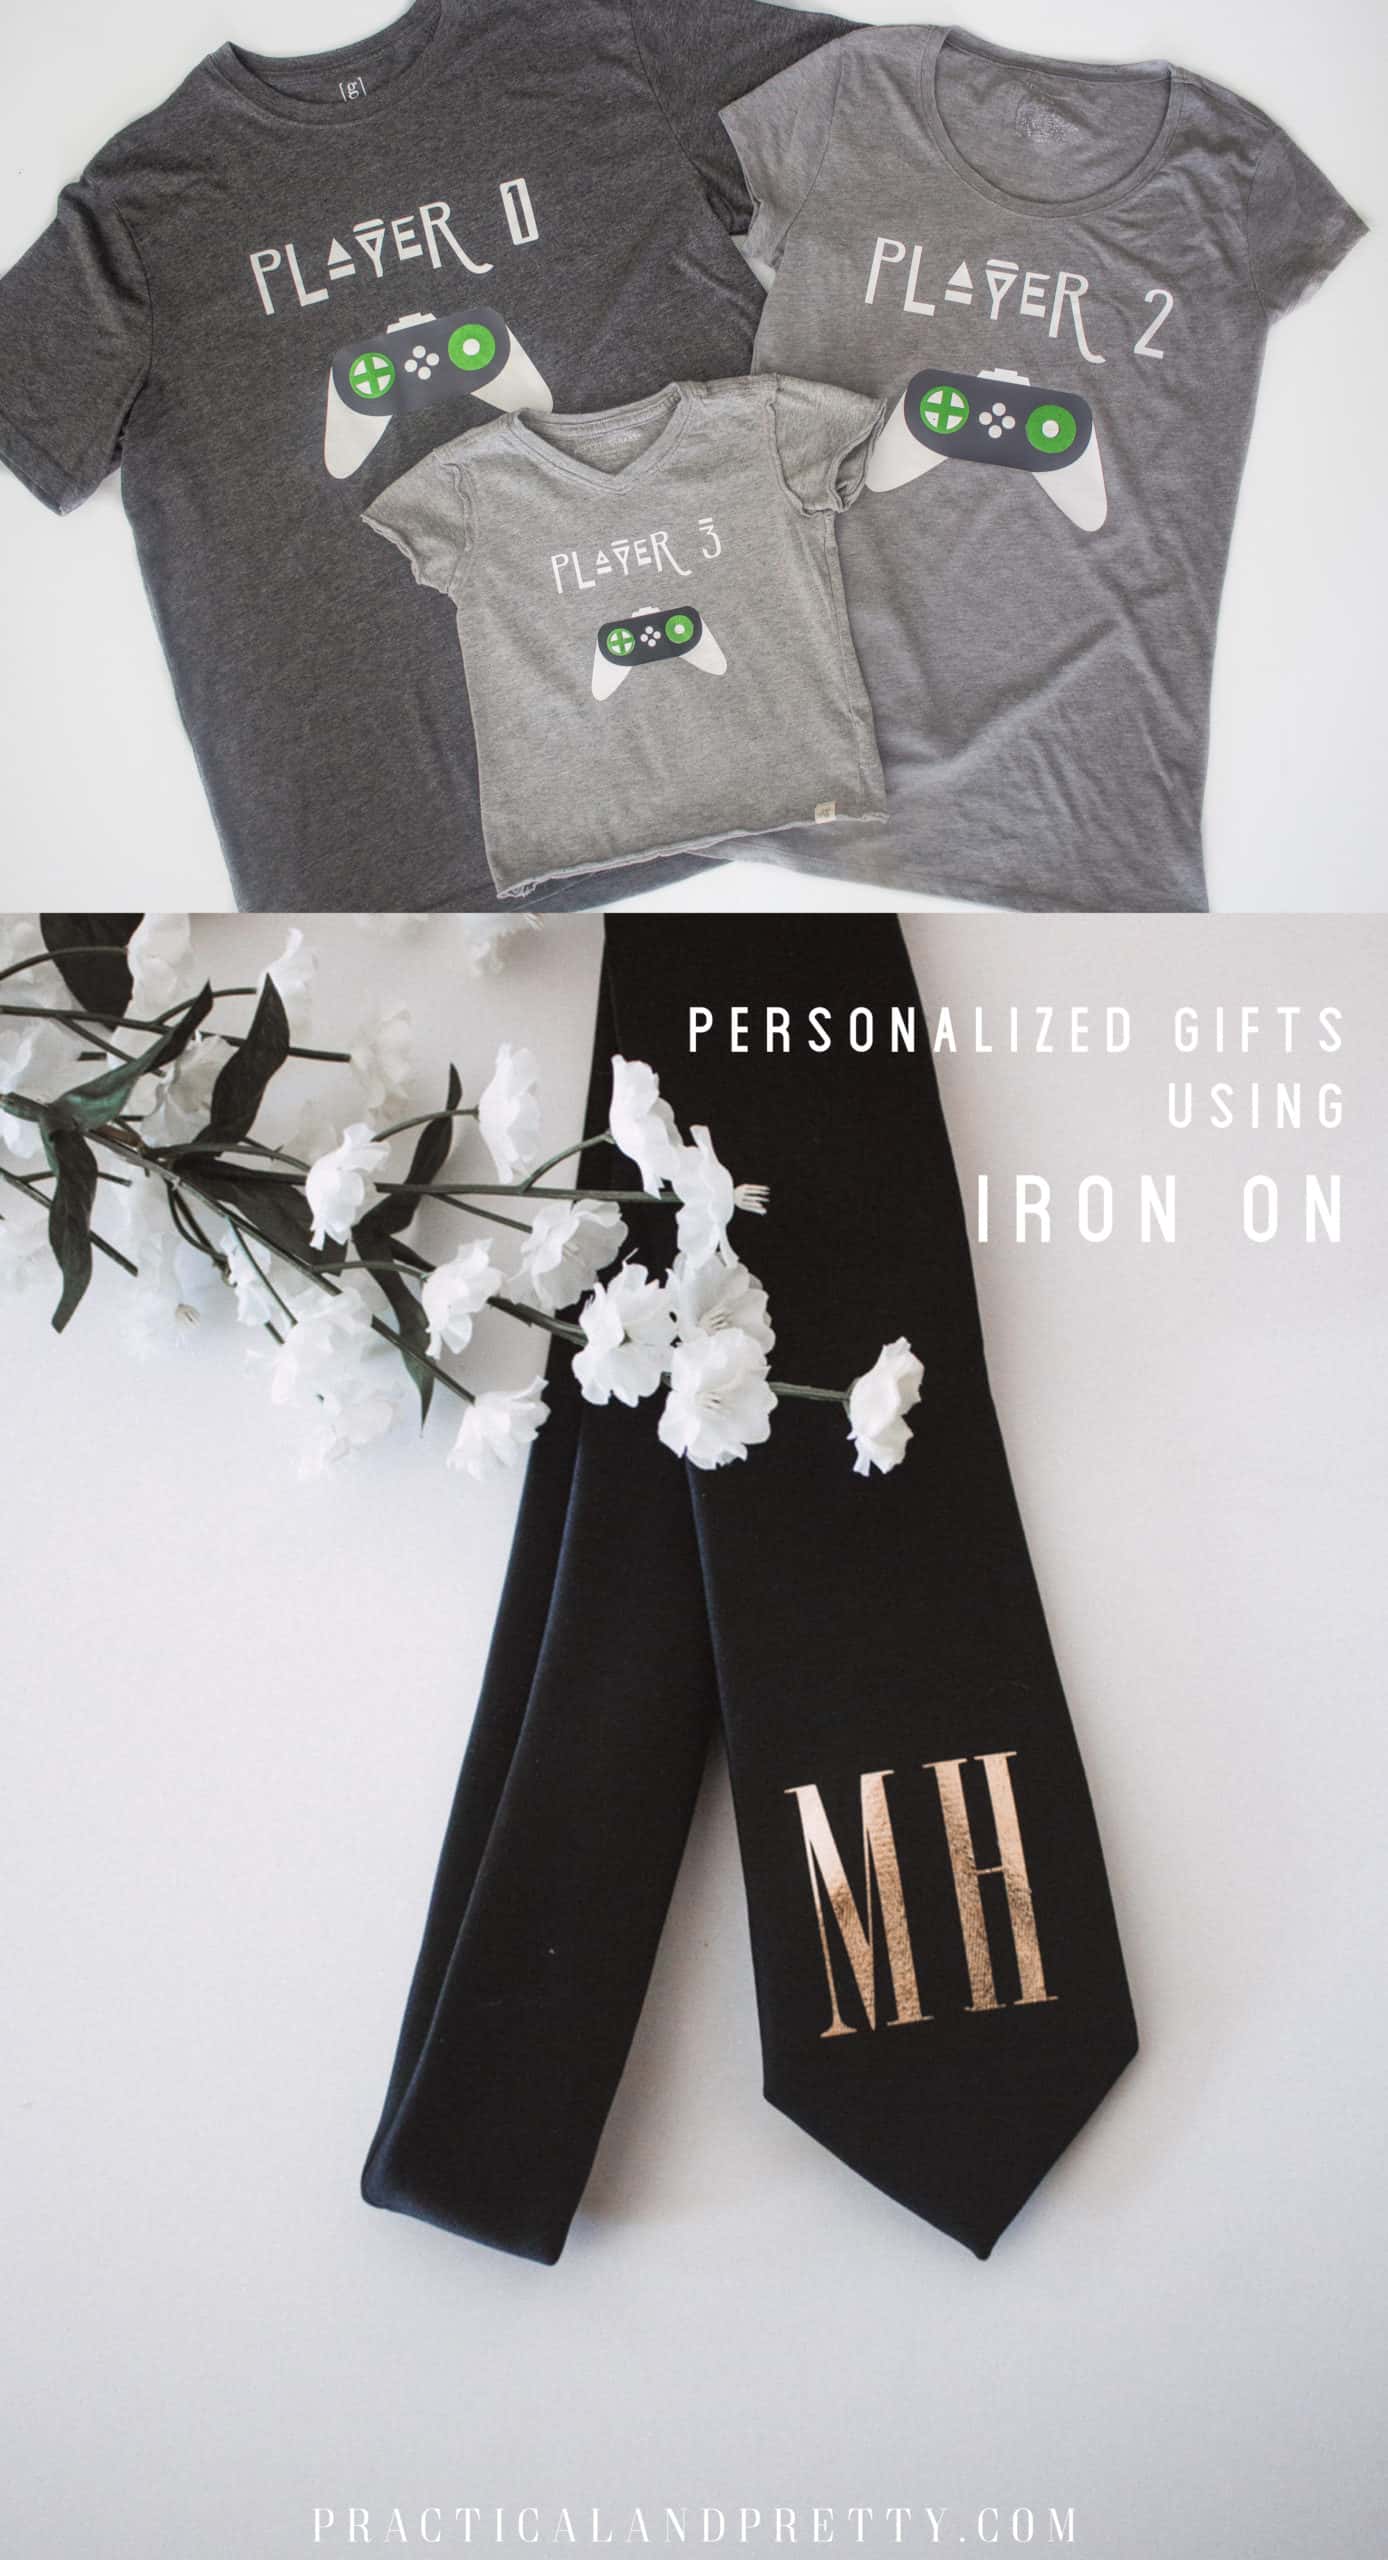 Personalize your Christmas this year or whatever gift giving season you're celebrating with some personalized gift ideas.